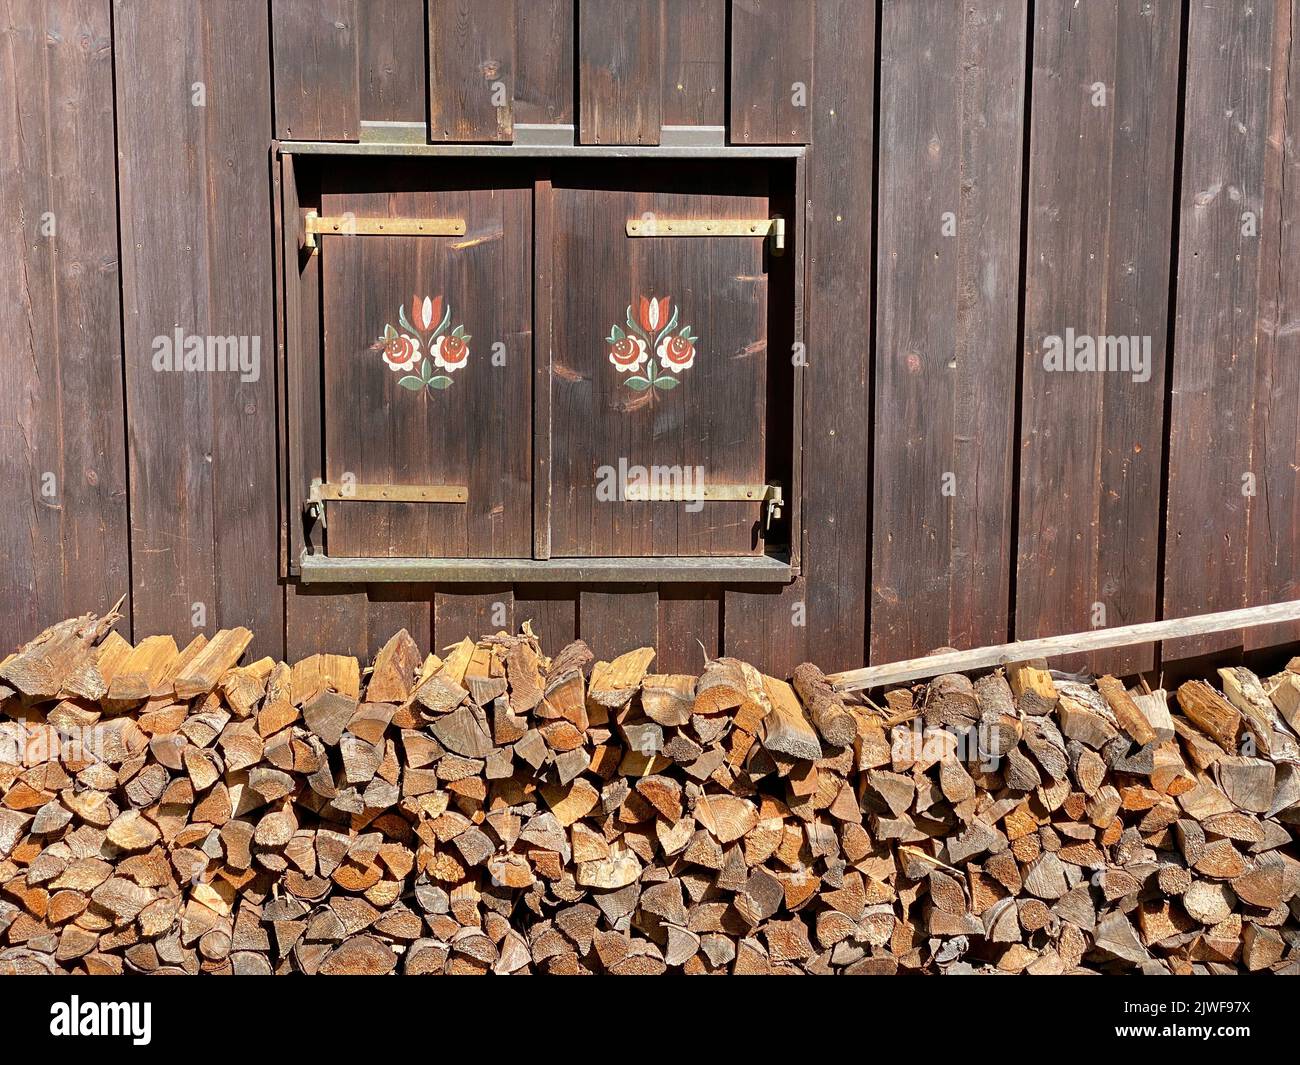 Closed Shutter With Painting And Firewood Stock Photo